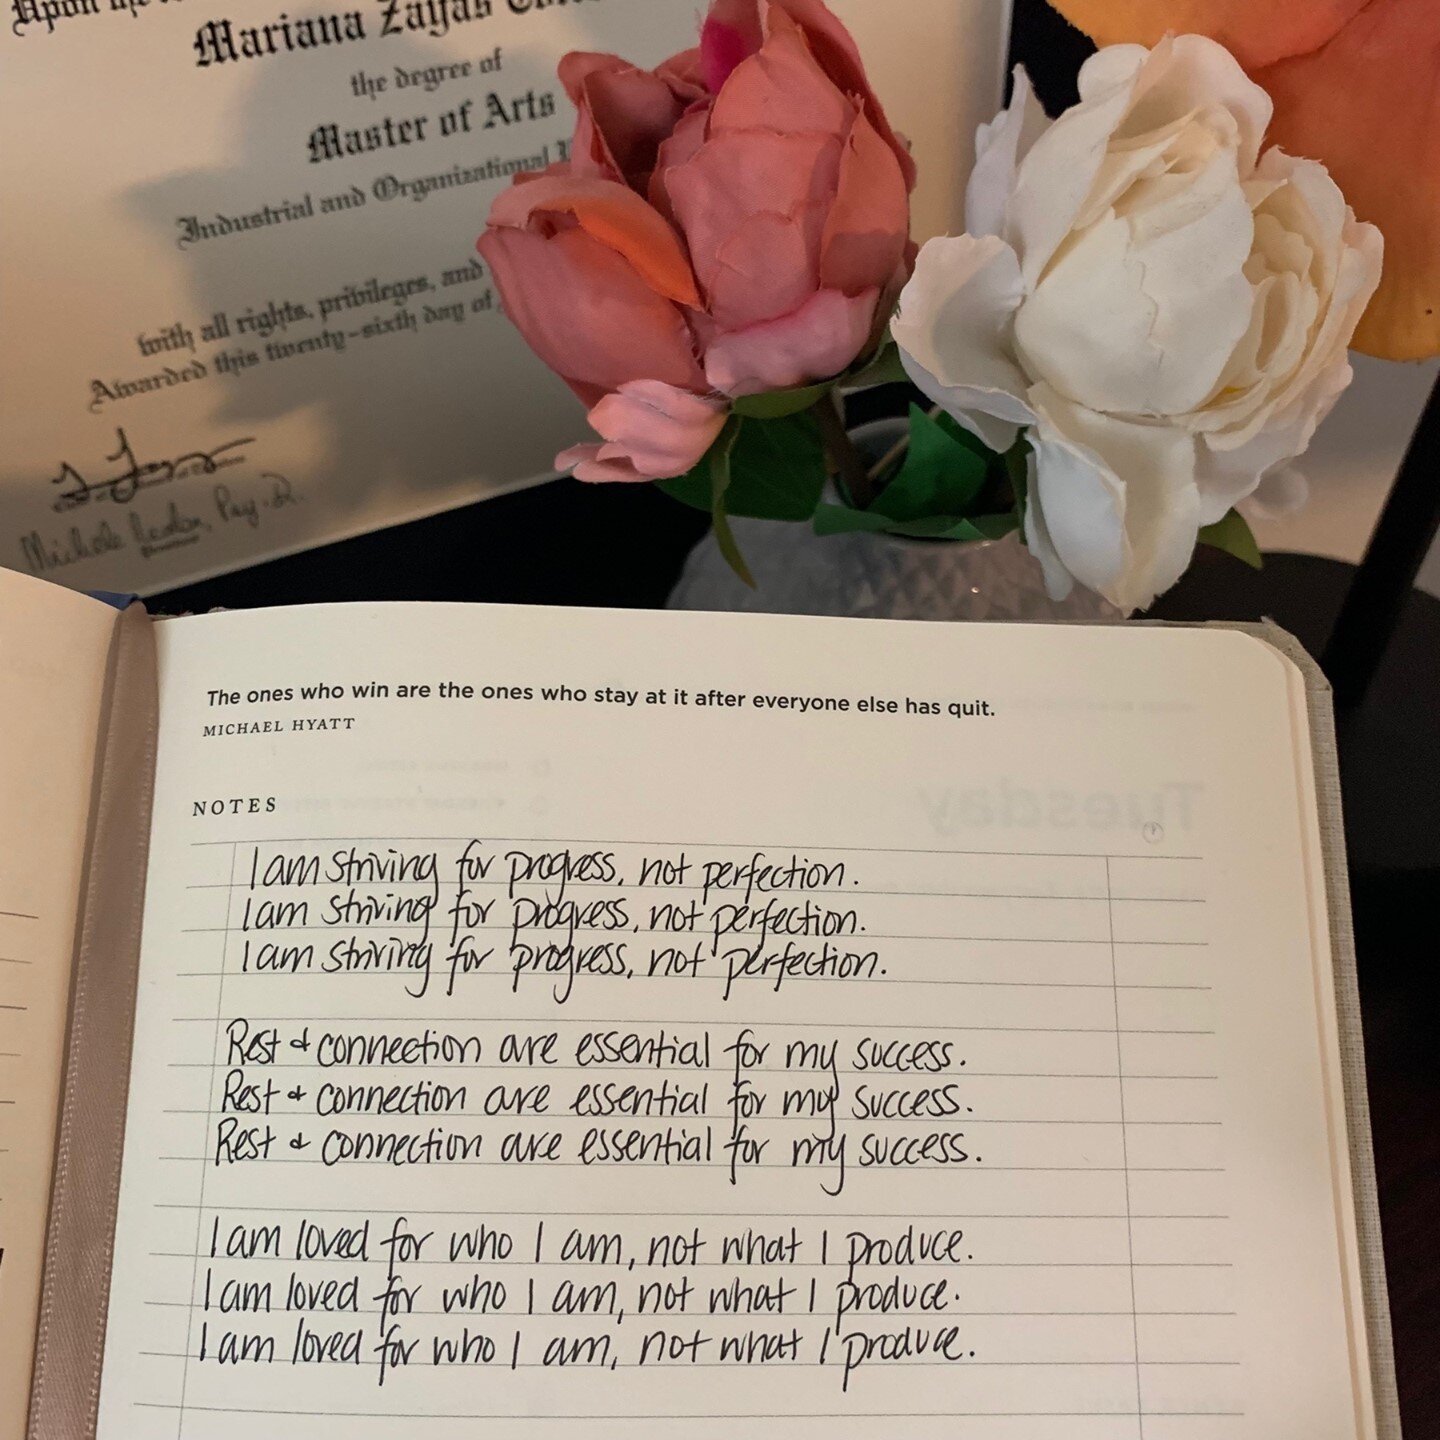 Practicing what I preach. These are my mental scripts for this week. 

1) I am striving for progress, not perfection. 
2) Rest &amp; connection are essential for my success. 
3) I am loved for who I am, not what I produce. 

With these sentences, you